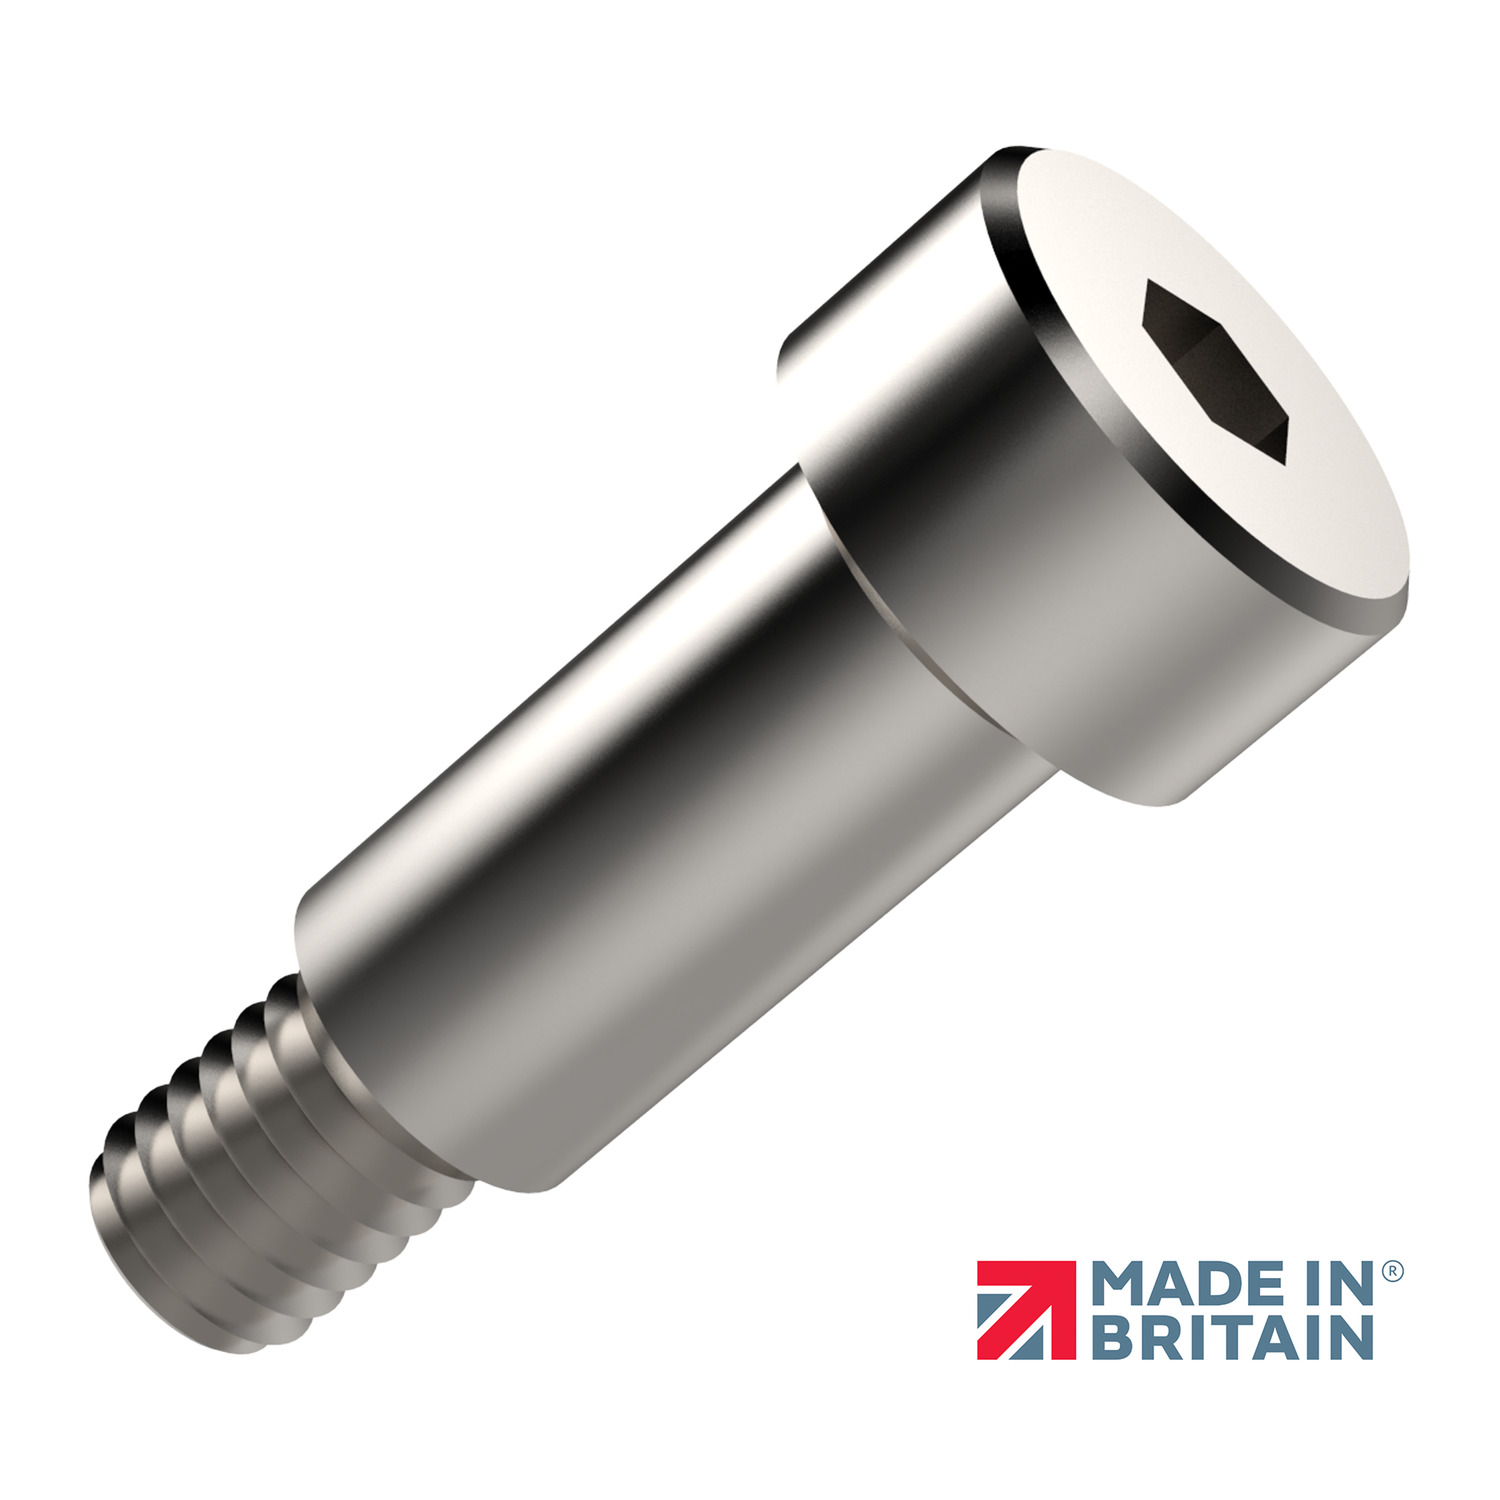 Inch Shoulder Screws - Cap Head Our popular stainless steel shoulder screws are also available with imperial (inch) dimensions.